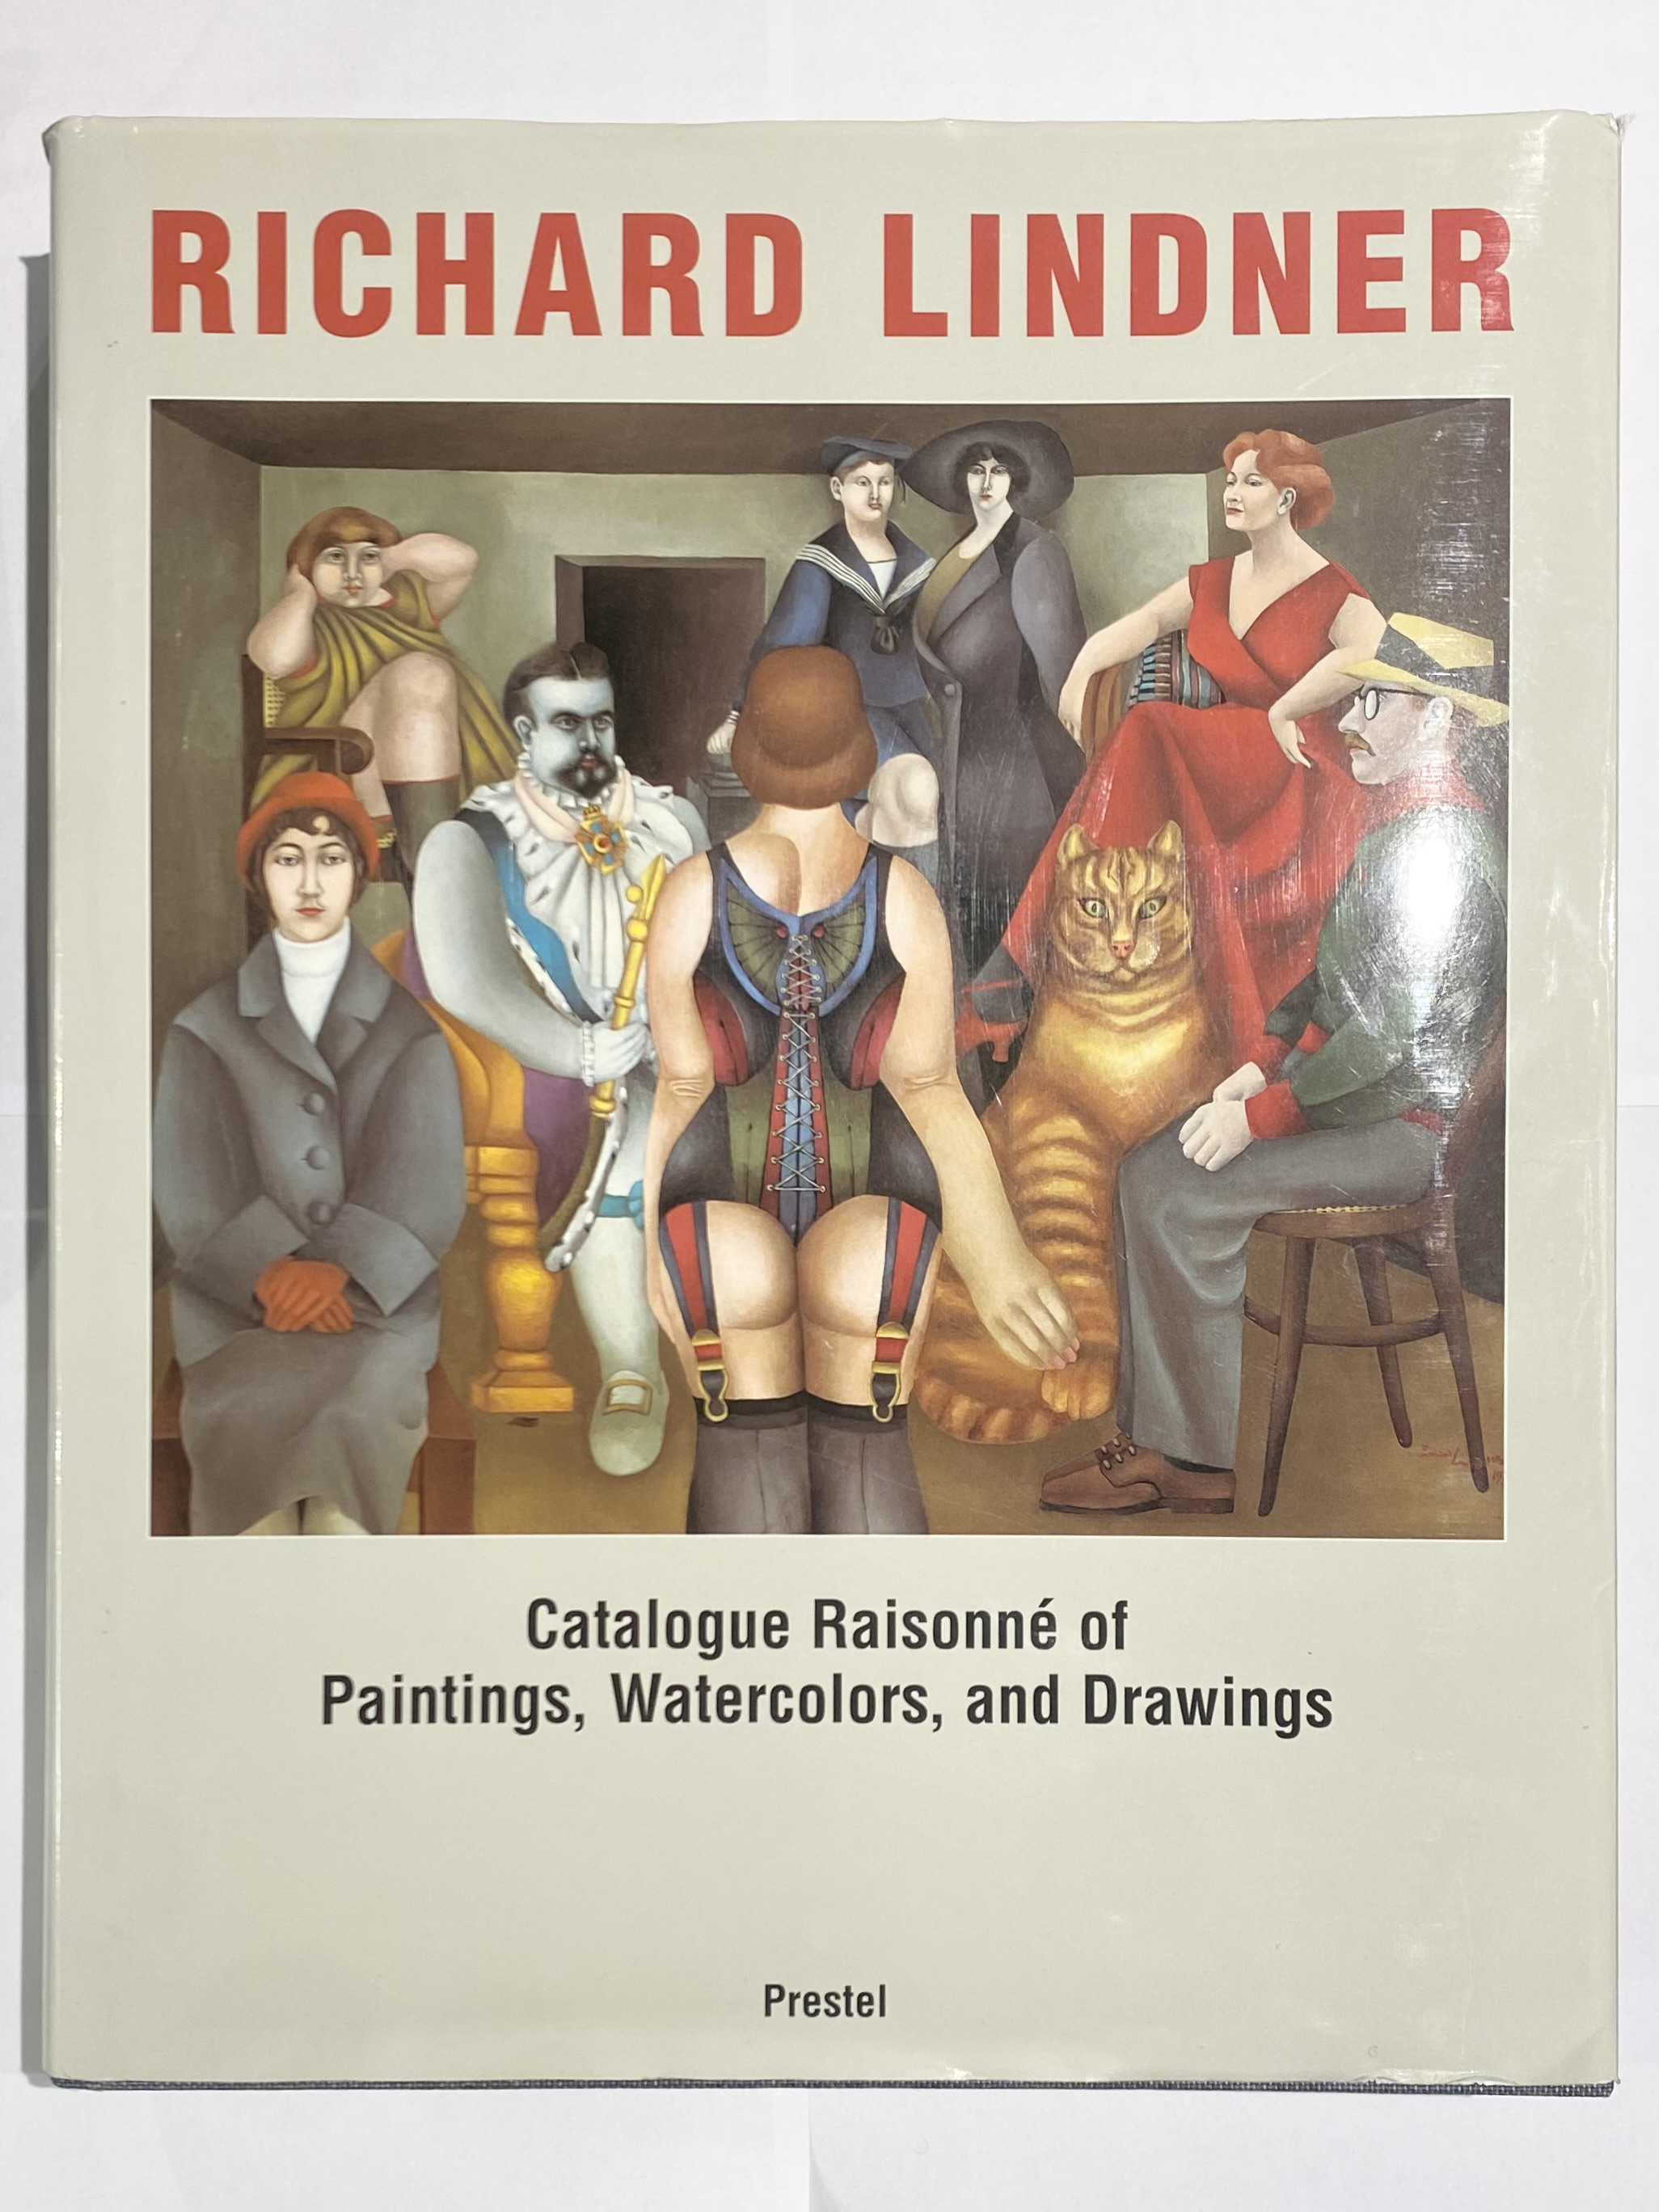 Richard Lindner: Catalogue Raisonné of Paintings, Watercolours, and Drawings